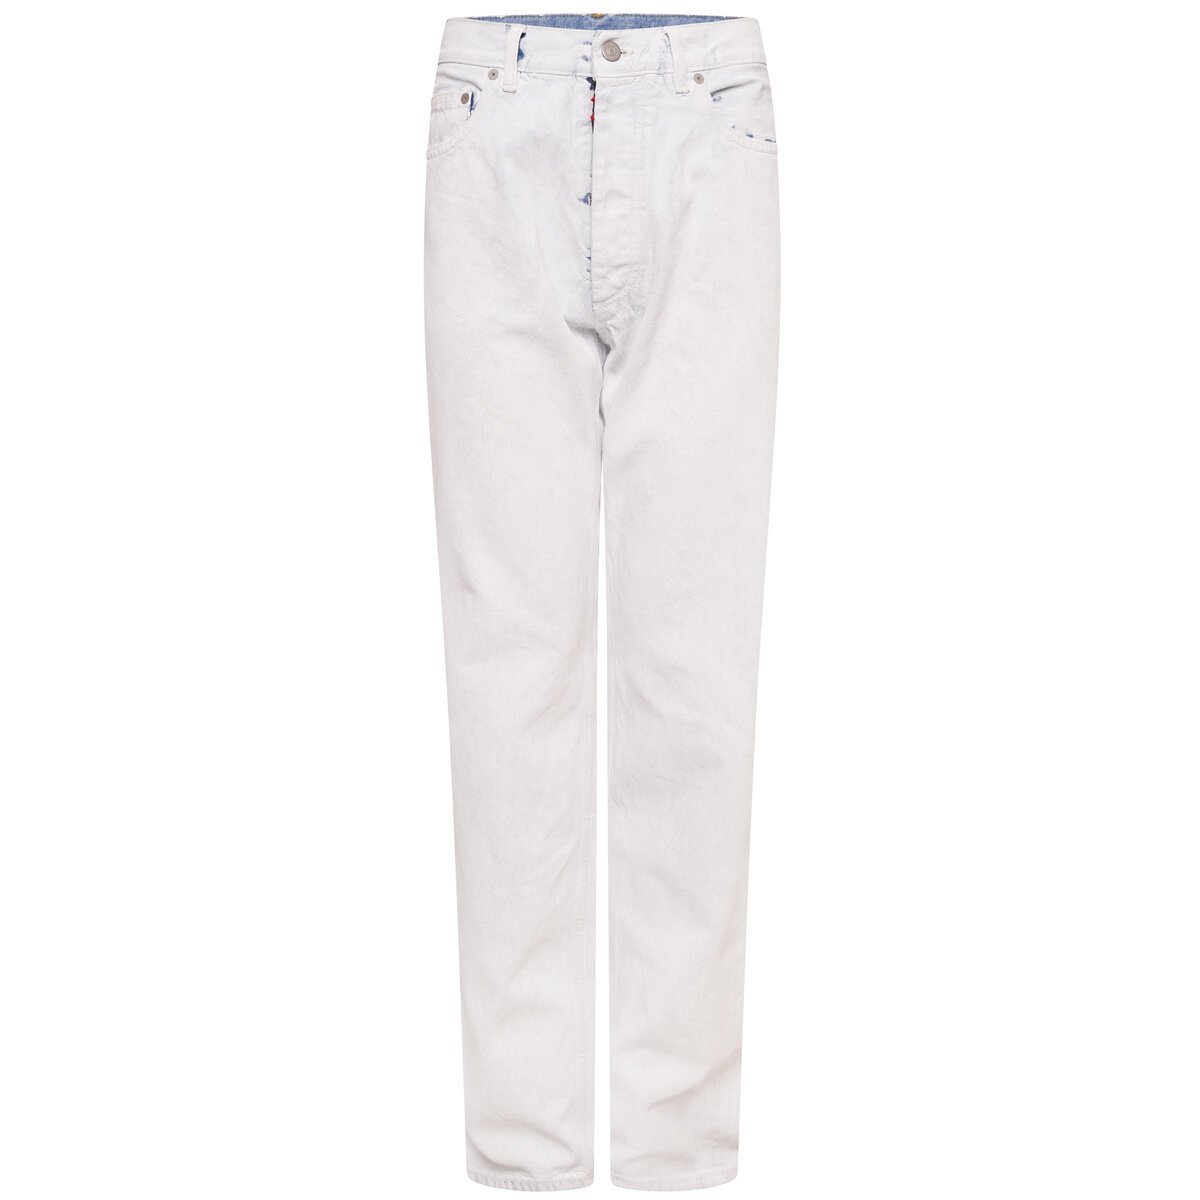 Painted Denim Jeans 32 White